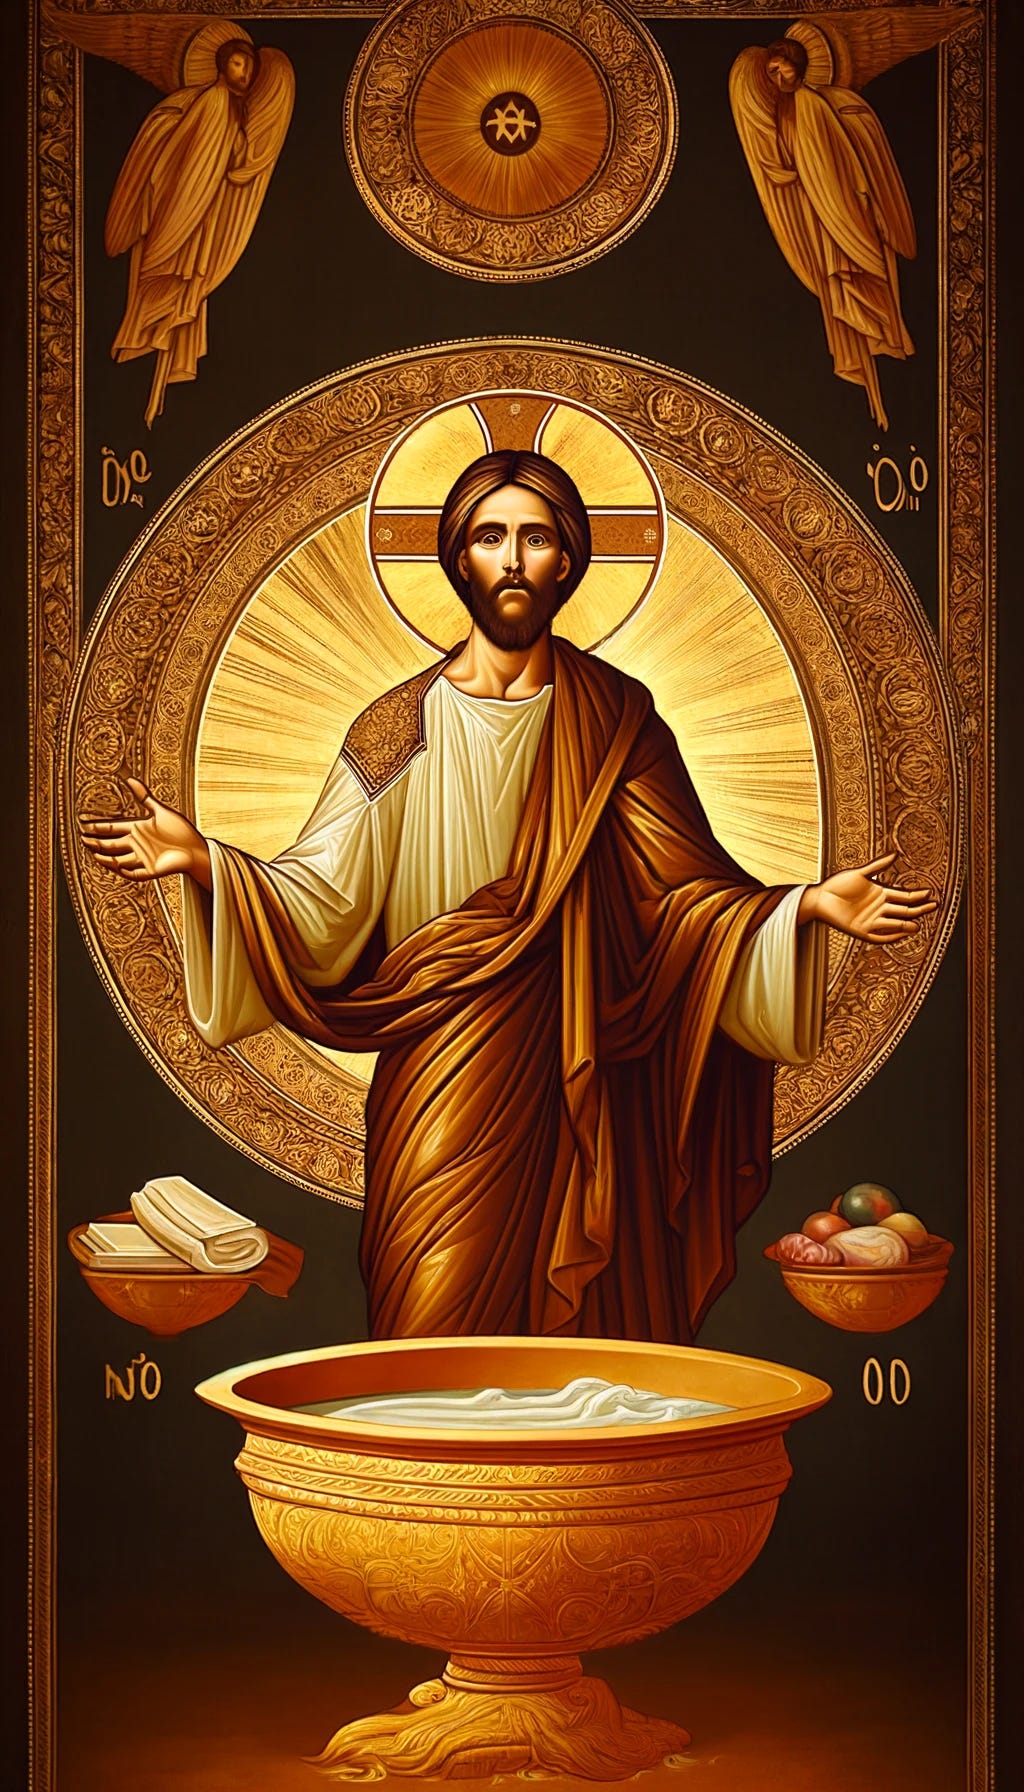 Create a traditionally iconographic image depicting Jesus' kenosis or self-emptying. Use classic Byzantine style with gold leaf accents and a solemn, reverent tone. Jesus should be depicted with a serene and humble expression, wearing simple robes and standing with open arms in a gesture of giving. Surround him with a radiant mandorla symbolizing divine glory. Include traditional iconographic elements such as a prominent halo, stylized facial features, and symbolic objects like a basin and towel at his feet. The background should feature a blend of rich, deep colors and gold to highlight the sacredness and significance of the scene.